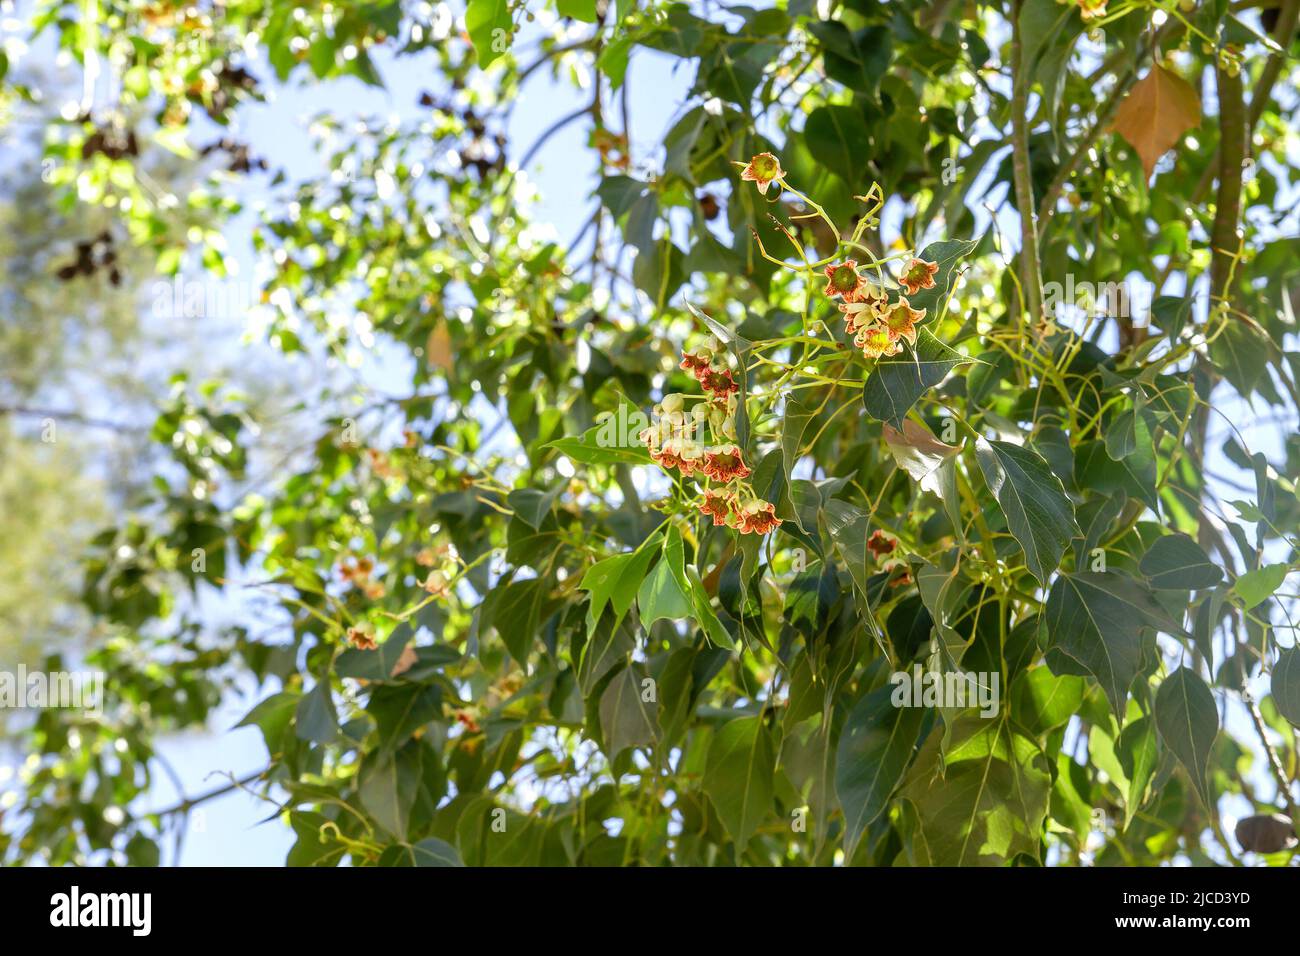 Kurrajong or bottle tree (Brachychiton populneus) green foliage and blooming flowers Stock Photo